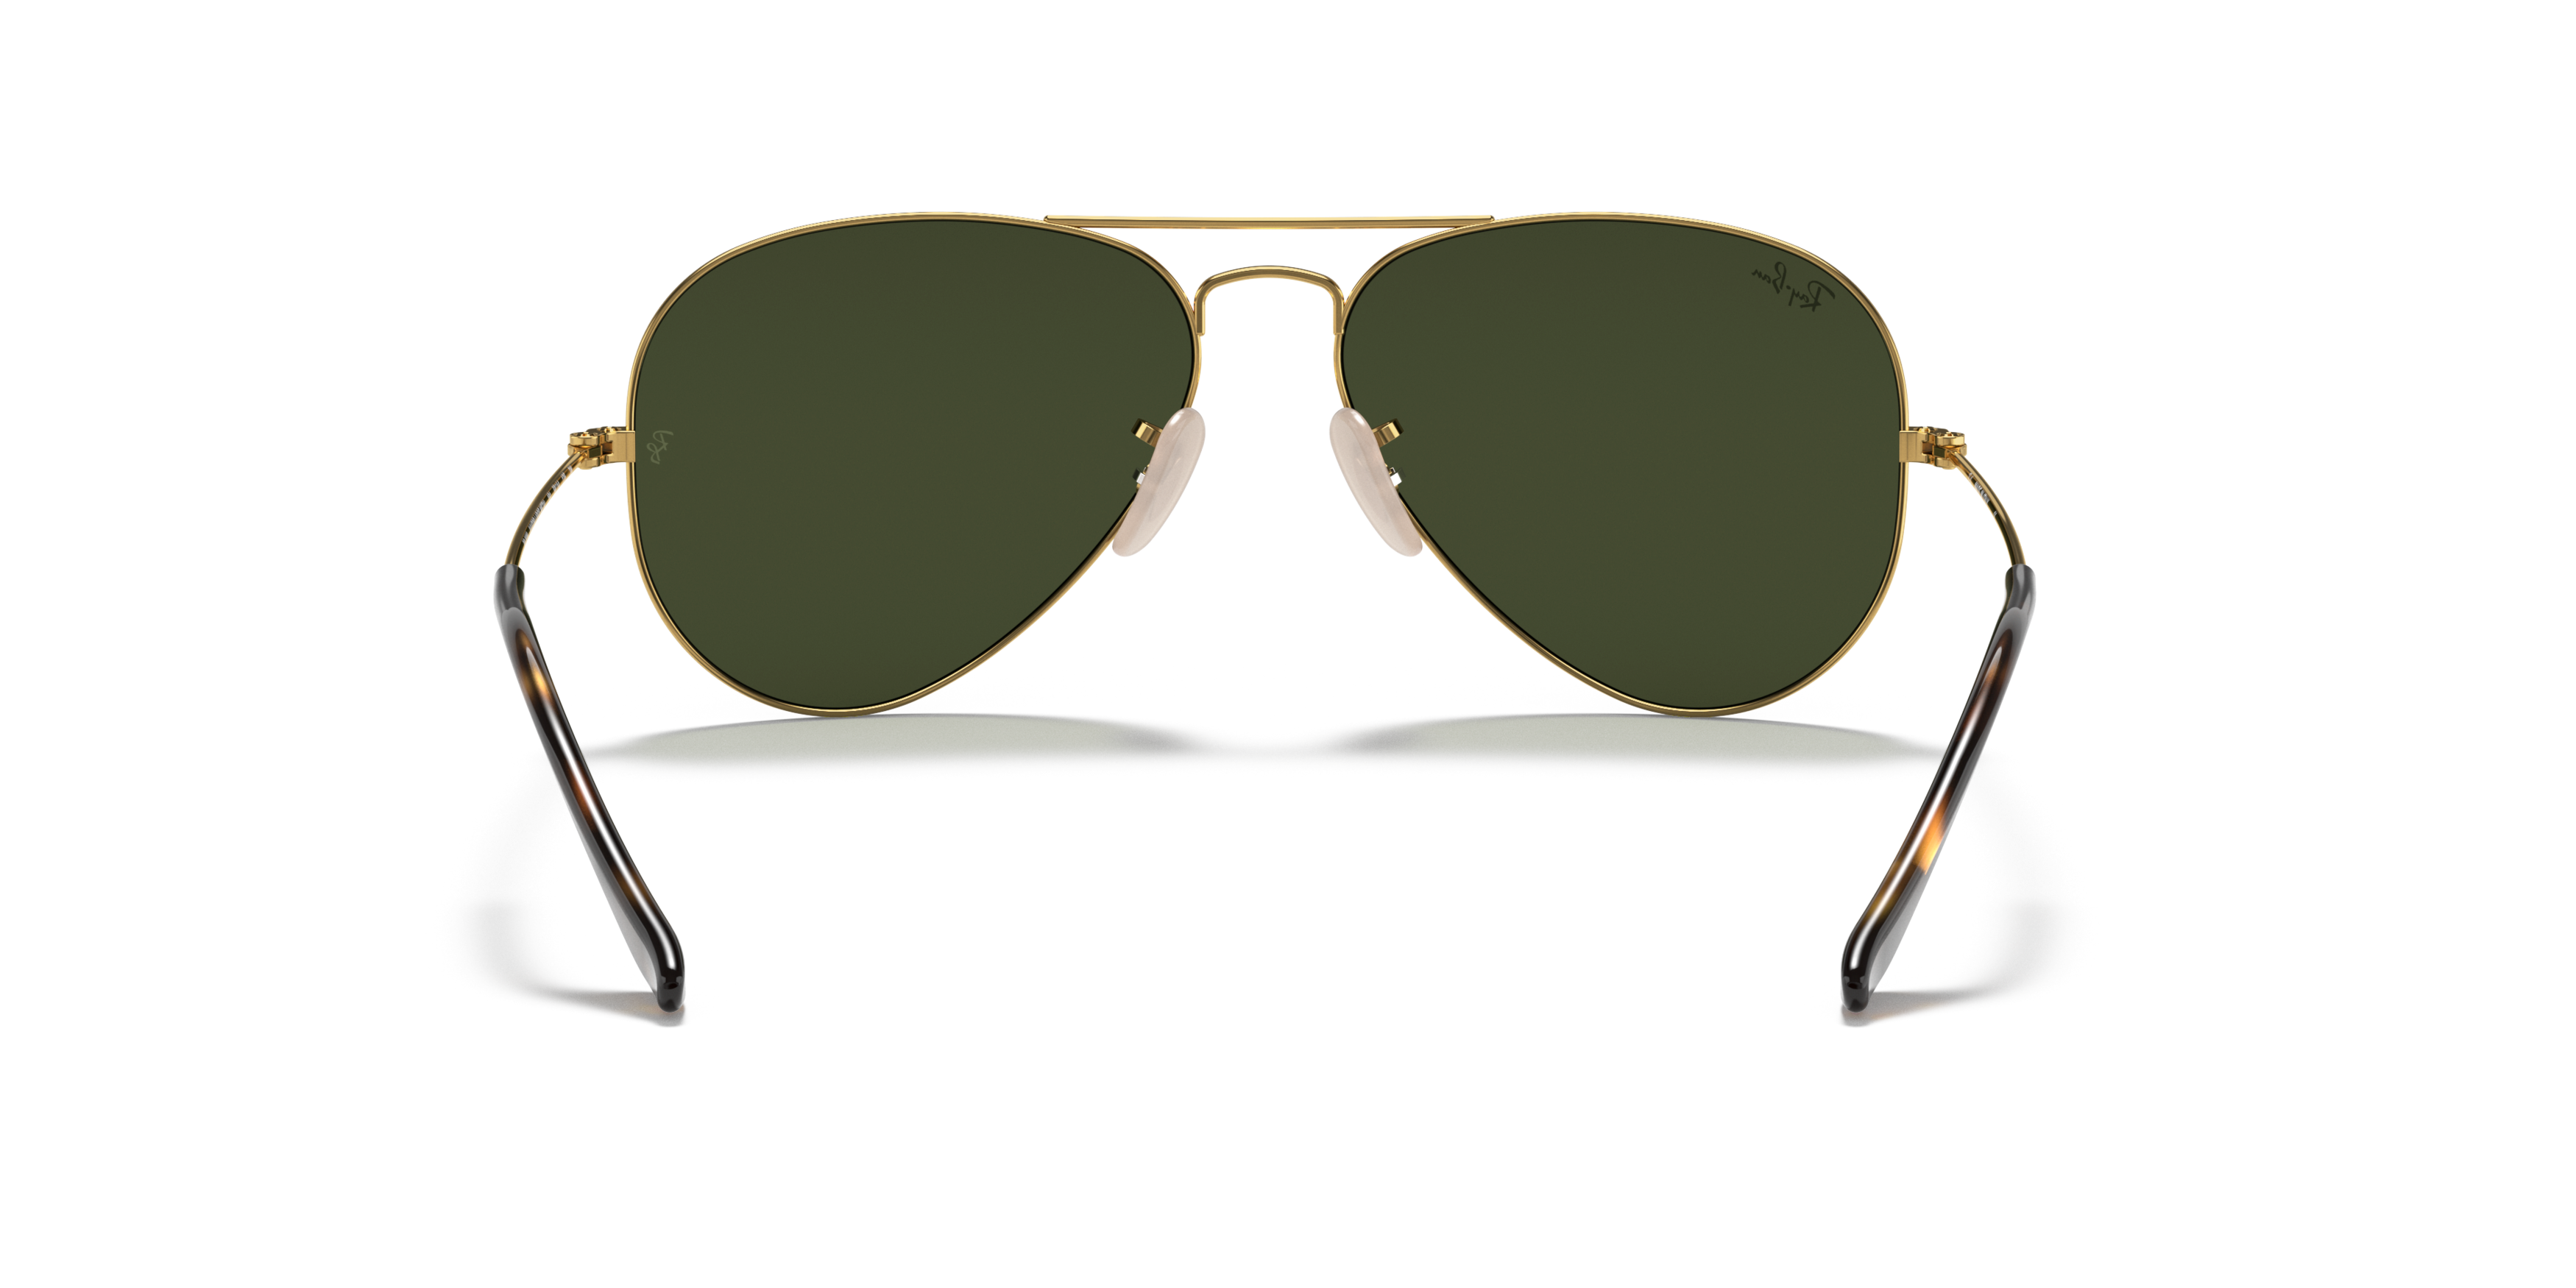 [products.image.detail02] Ray-Ban Aviator Havana Collection RB3025 181